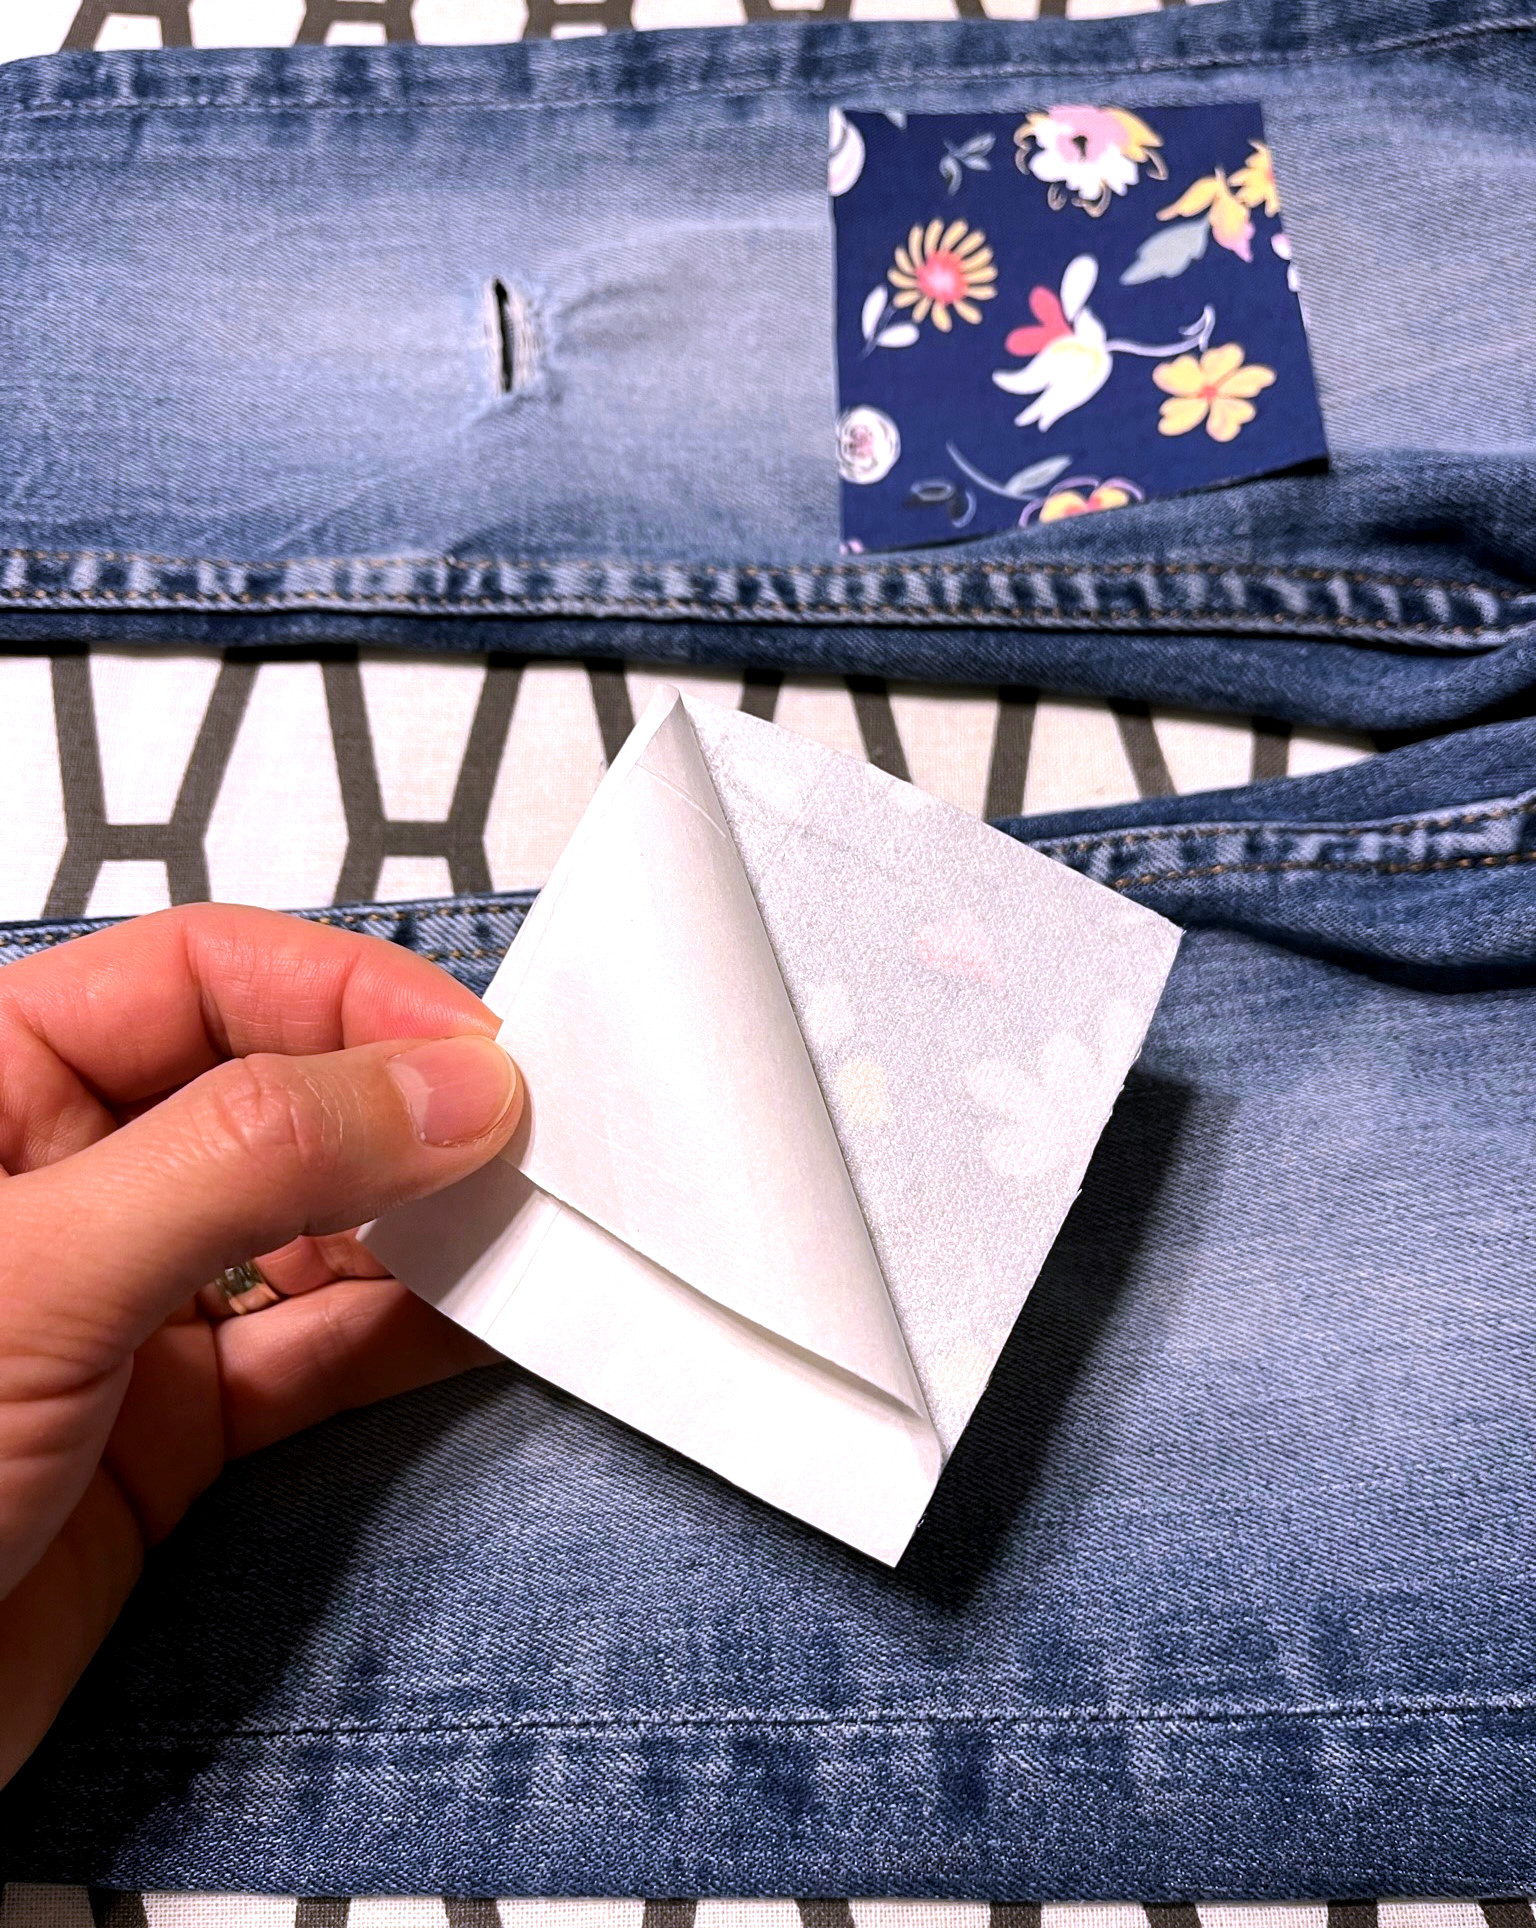 The quickest way to add knee patches to jeans - I Can Sew This